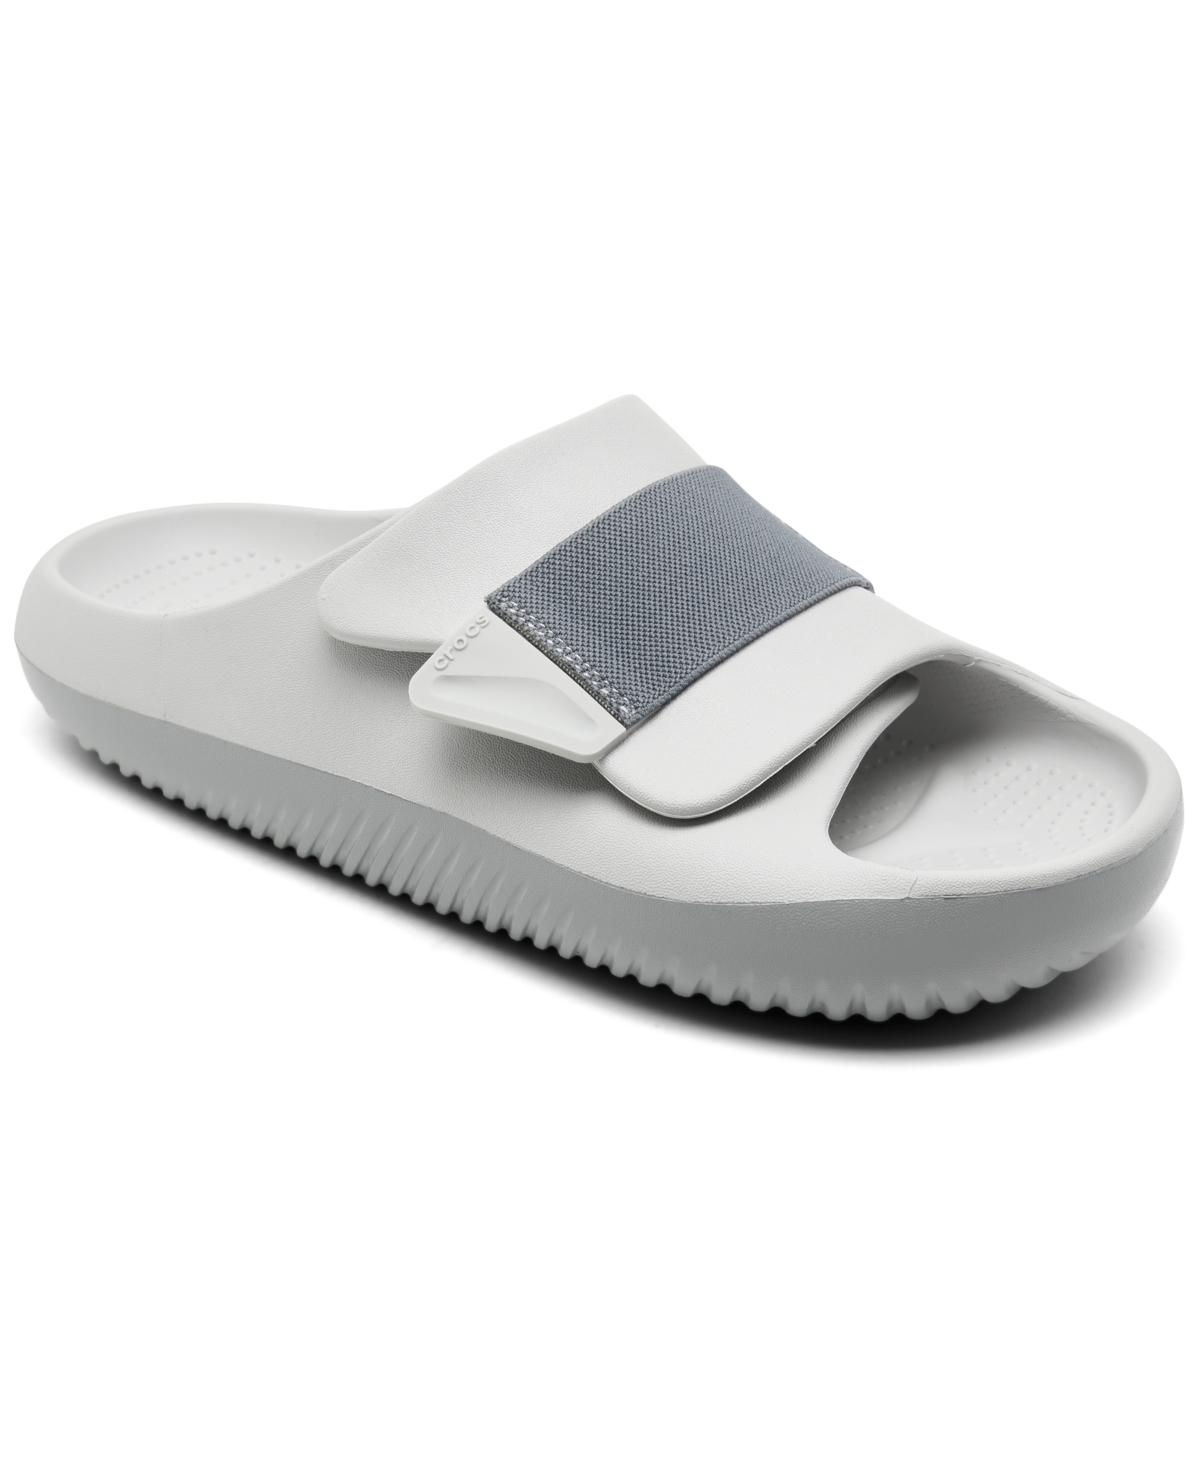 Men's Mellow Luxe Recovery Slide Sandals from Finish Line - Atomic